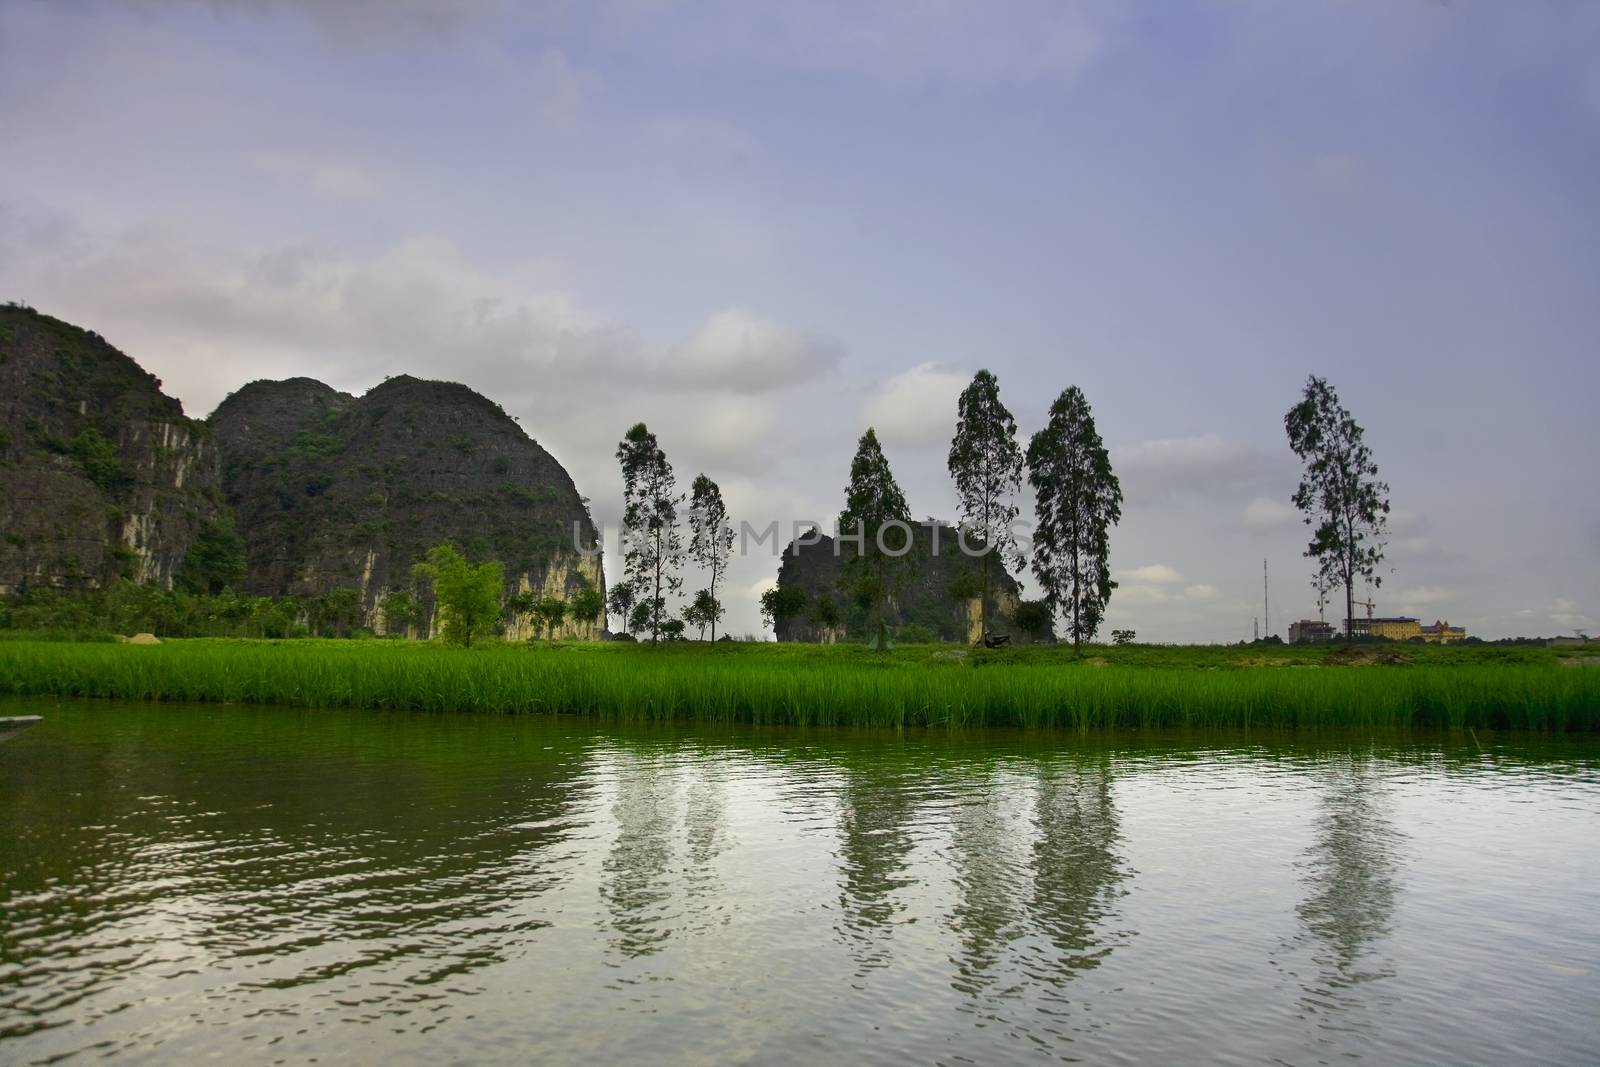 Travelling along rice fields on Tam Coc stream, Ninnh Binh, Viet by foryouinf